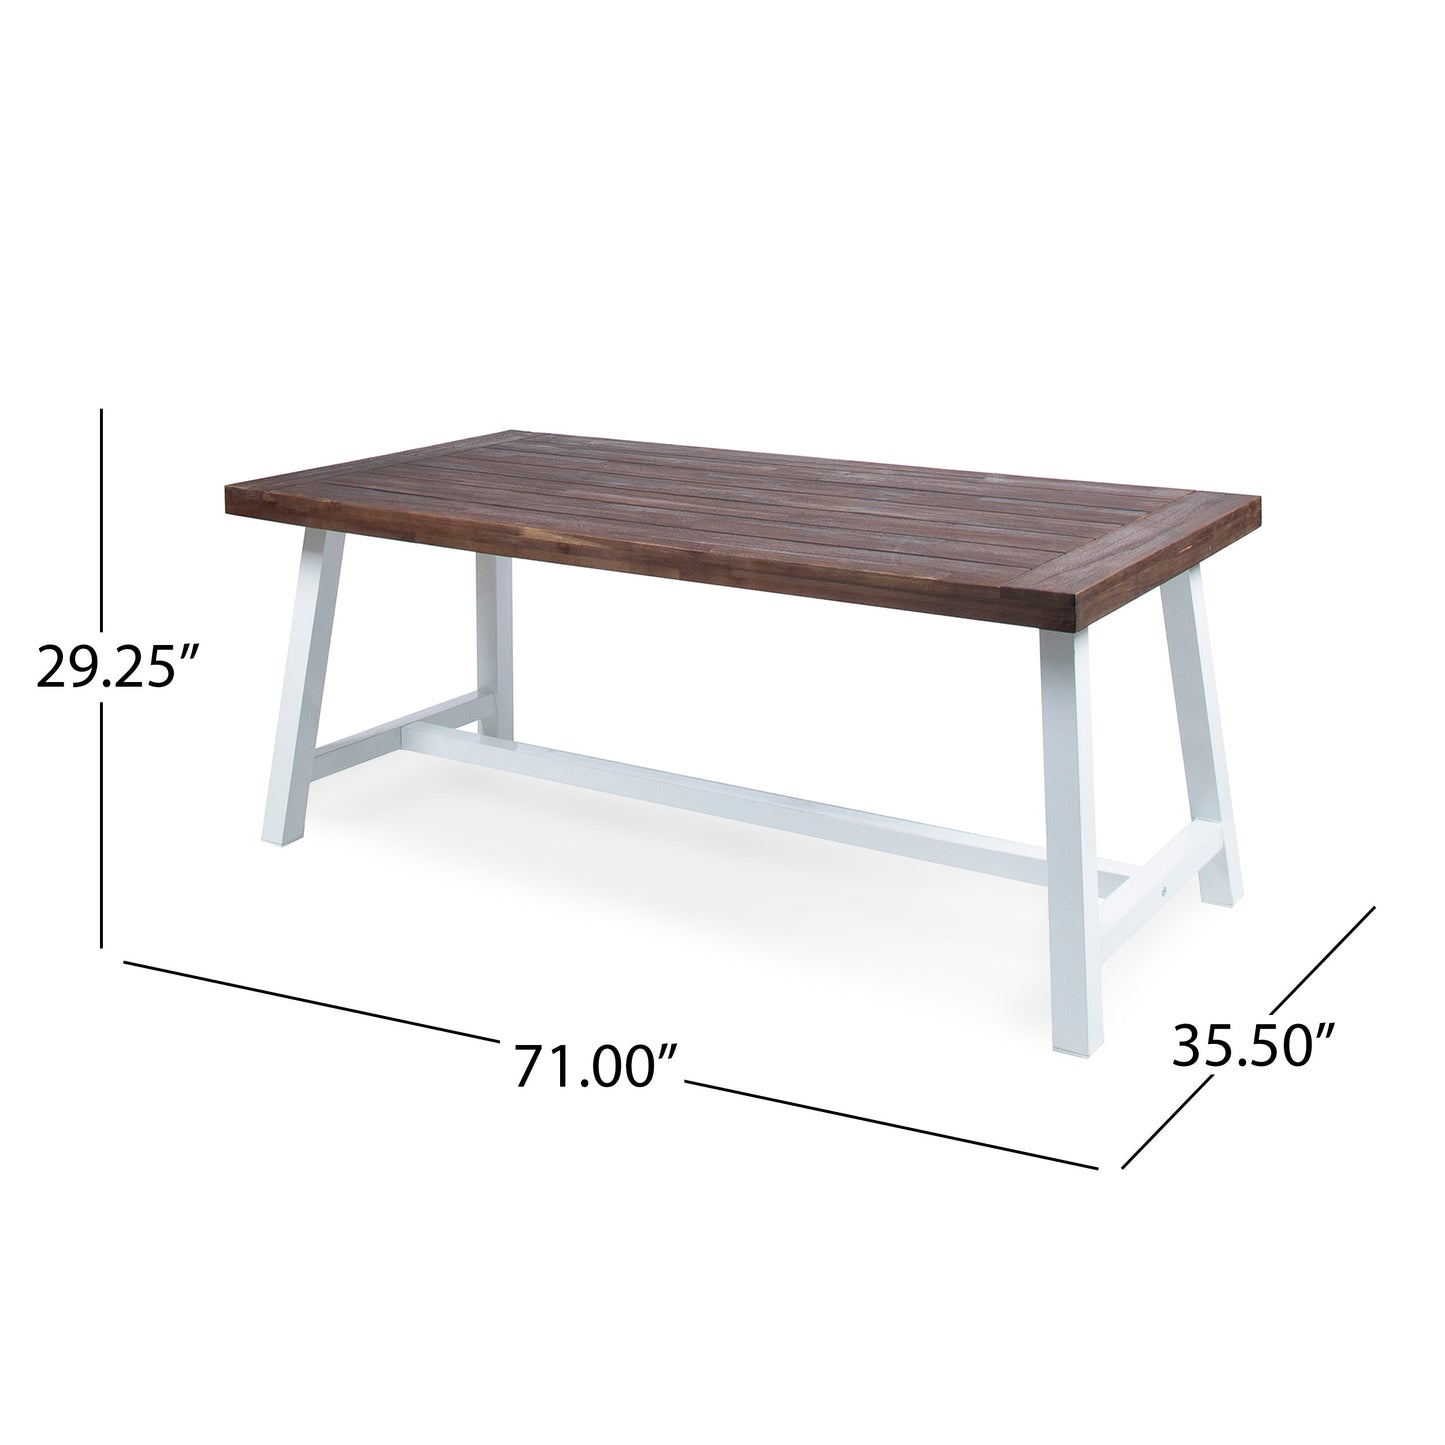 Bowman Outdoor Sandblast Finish Acacia Wood Dining Table with Metal Finish Frame